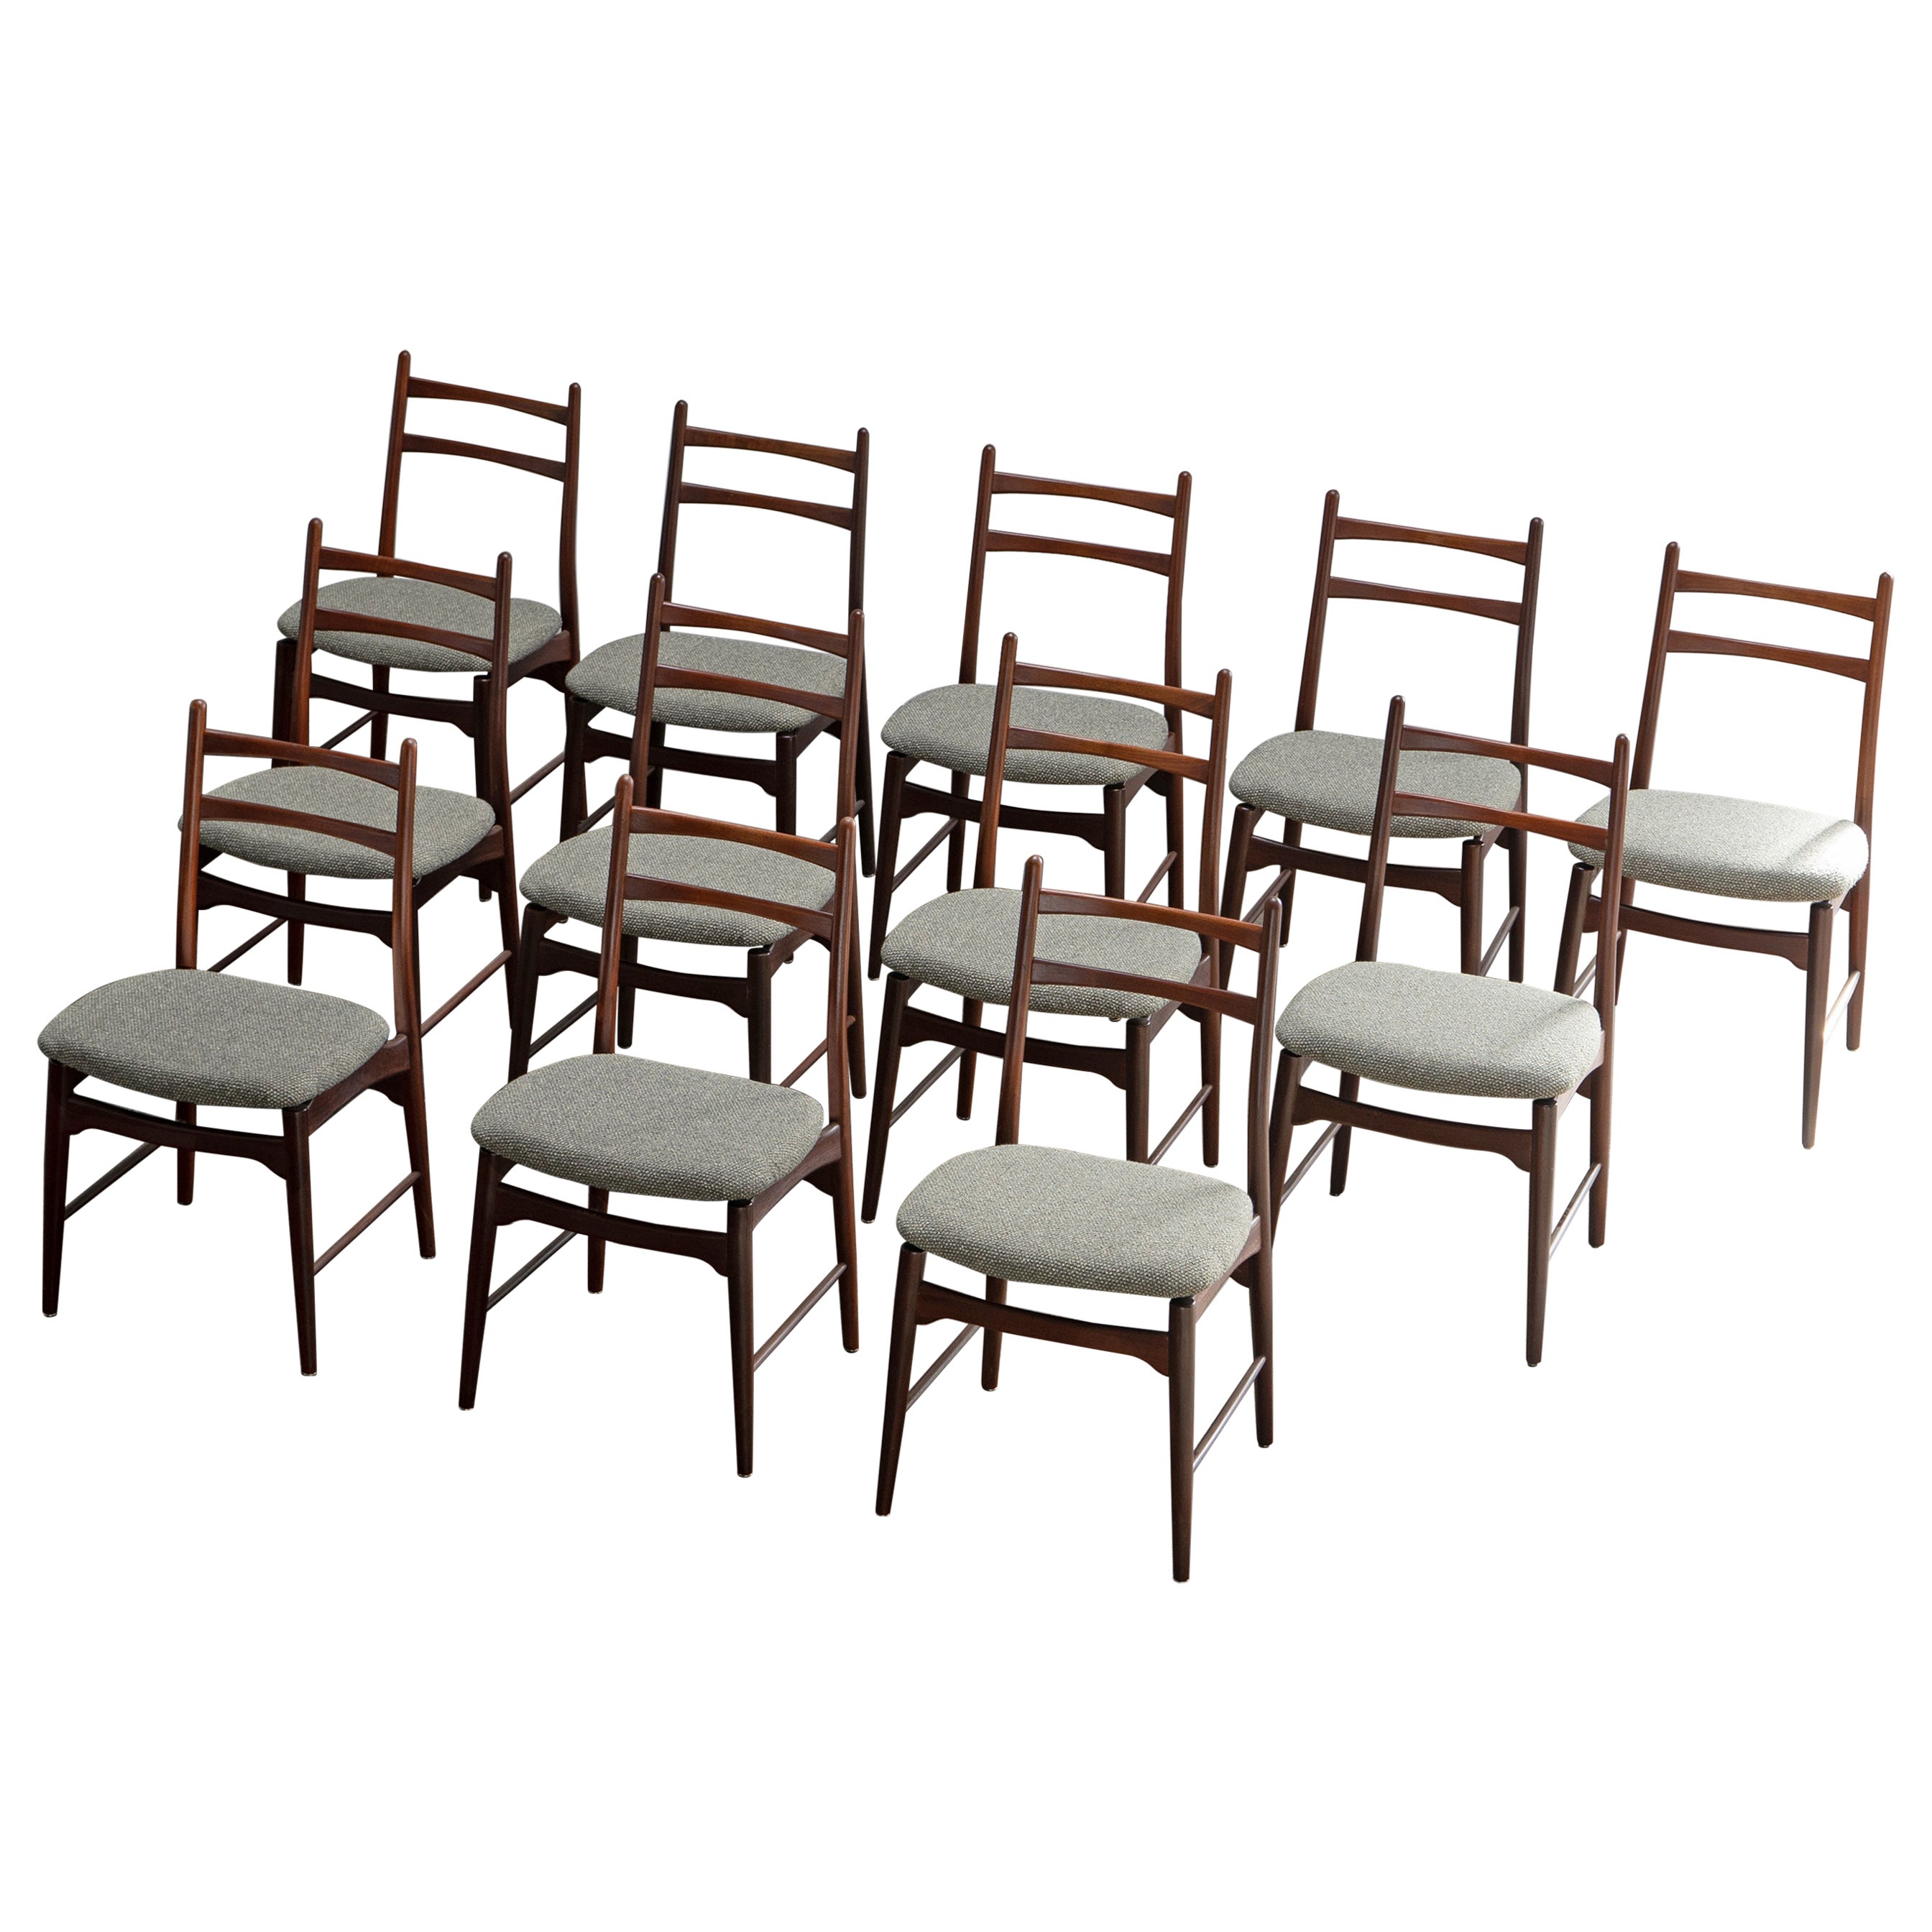 Set of Twelve Mid-Century Teak Dining Chairs by Wilkhahn Germany, 1958 For Sale